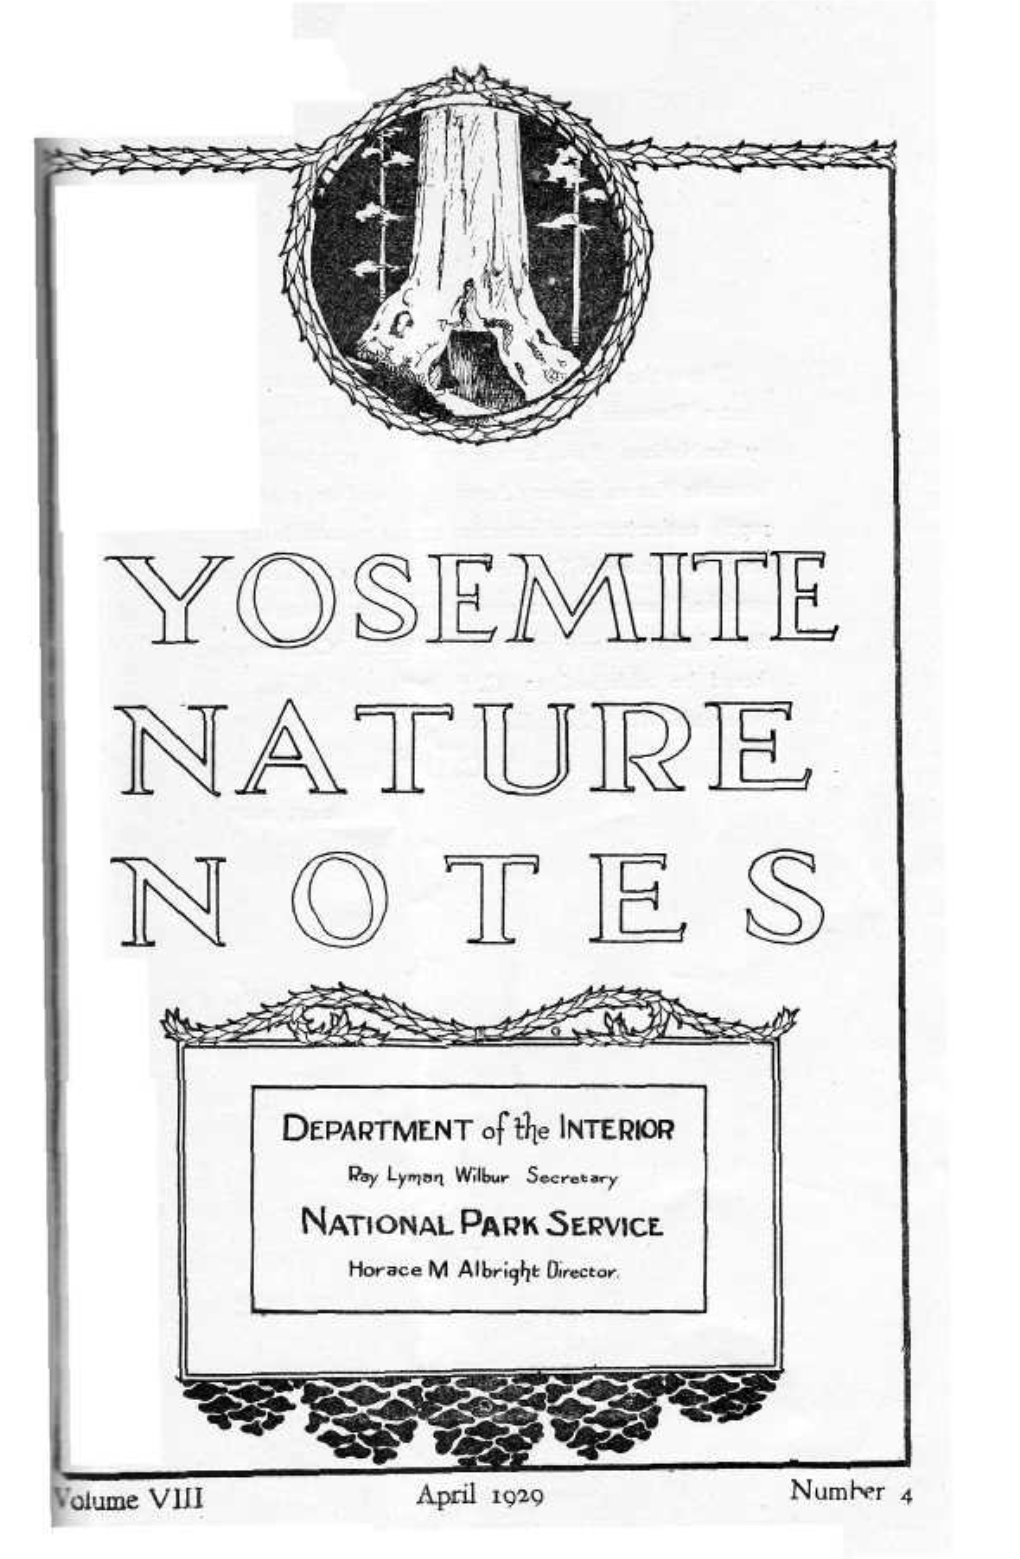 Volume V III April 1929 N Um Her 4 This Is the Official Publication of the Educational Depart - Ment of Yosemite National Park